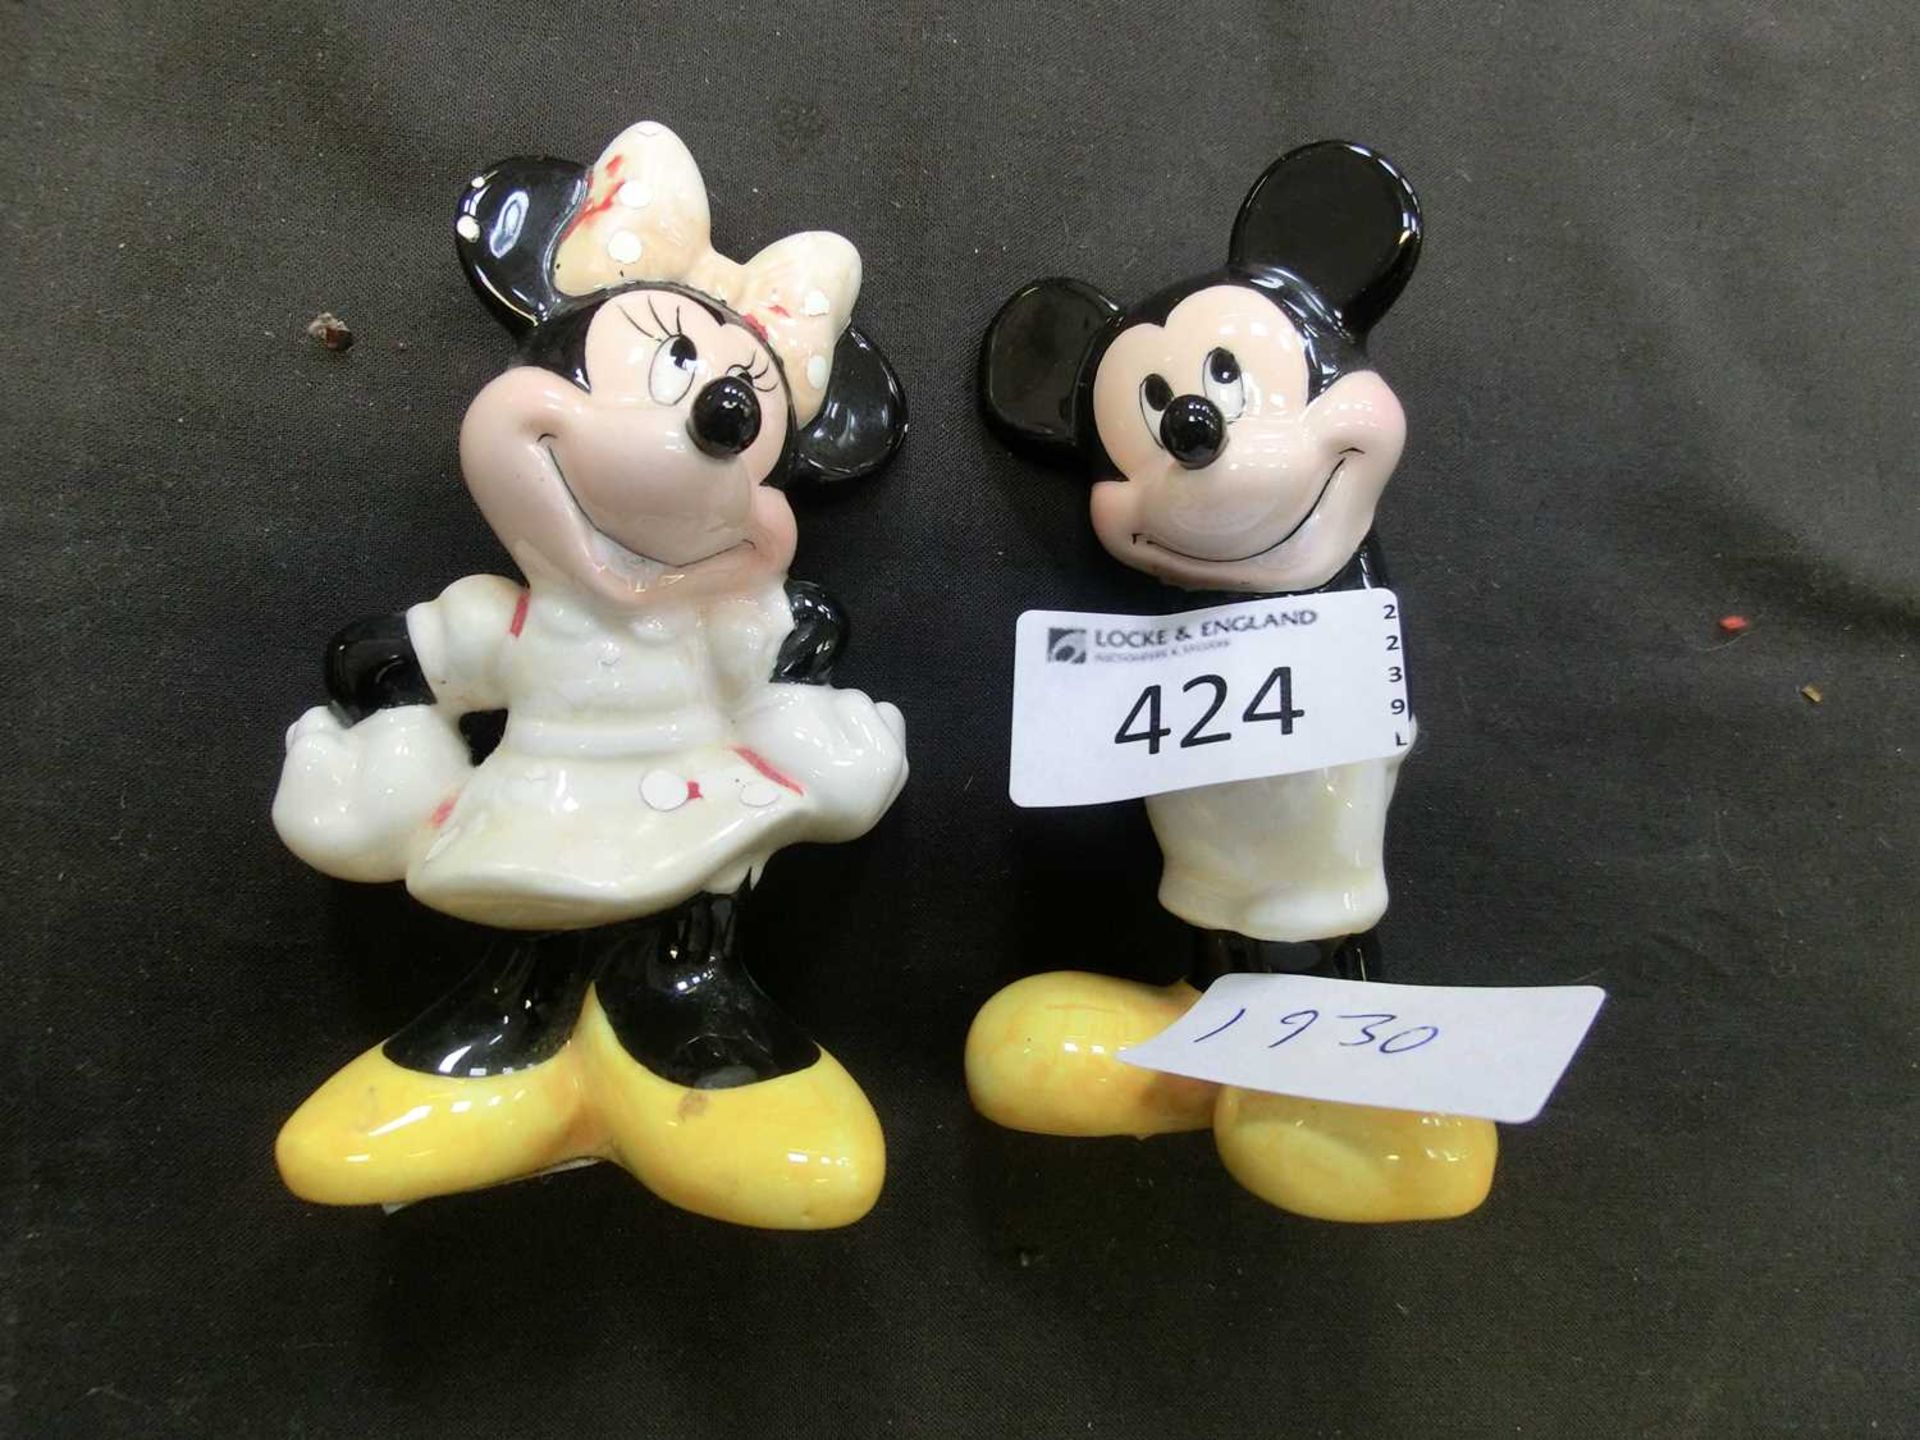 Two ceramic models of Mickey and Minnie Mouse